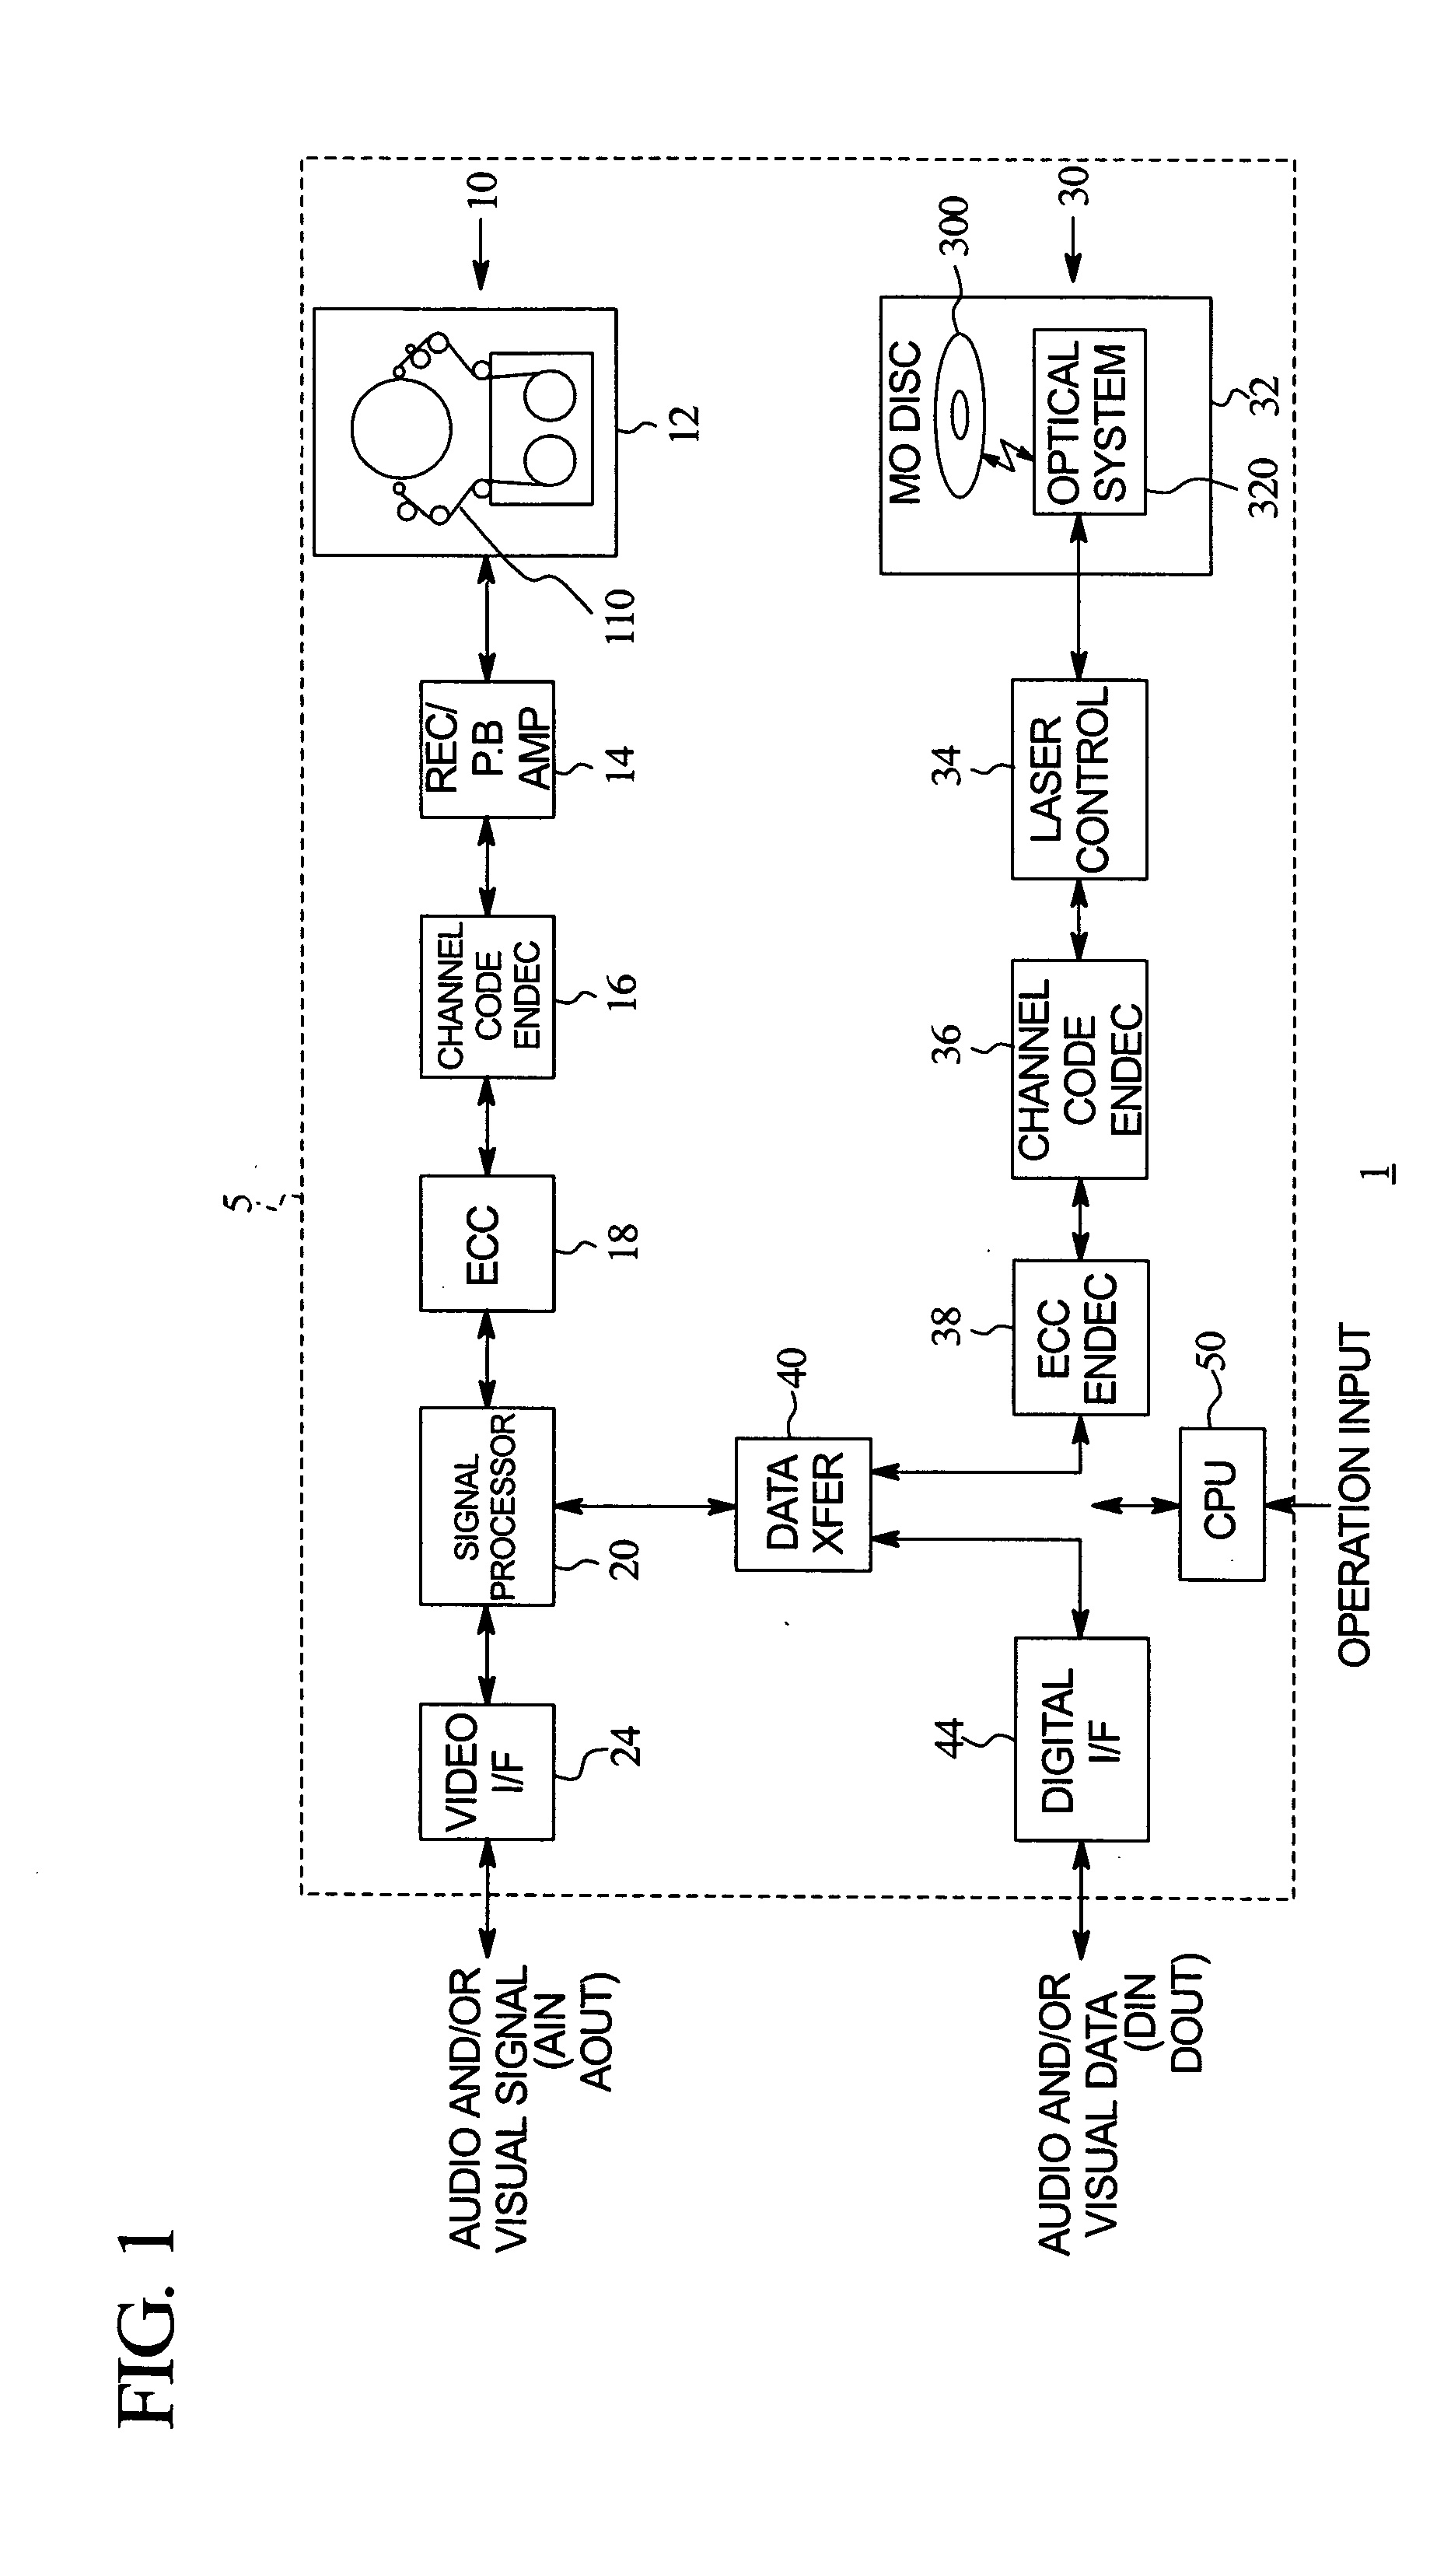 Data recording and reproducing apparatus having a data transfer device selectively transferring data between multiple data and reproducing devices